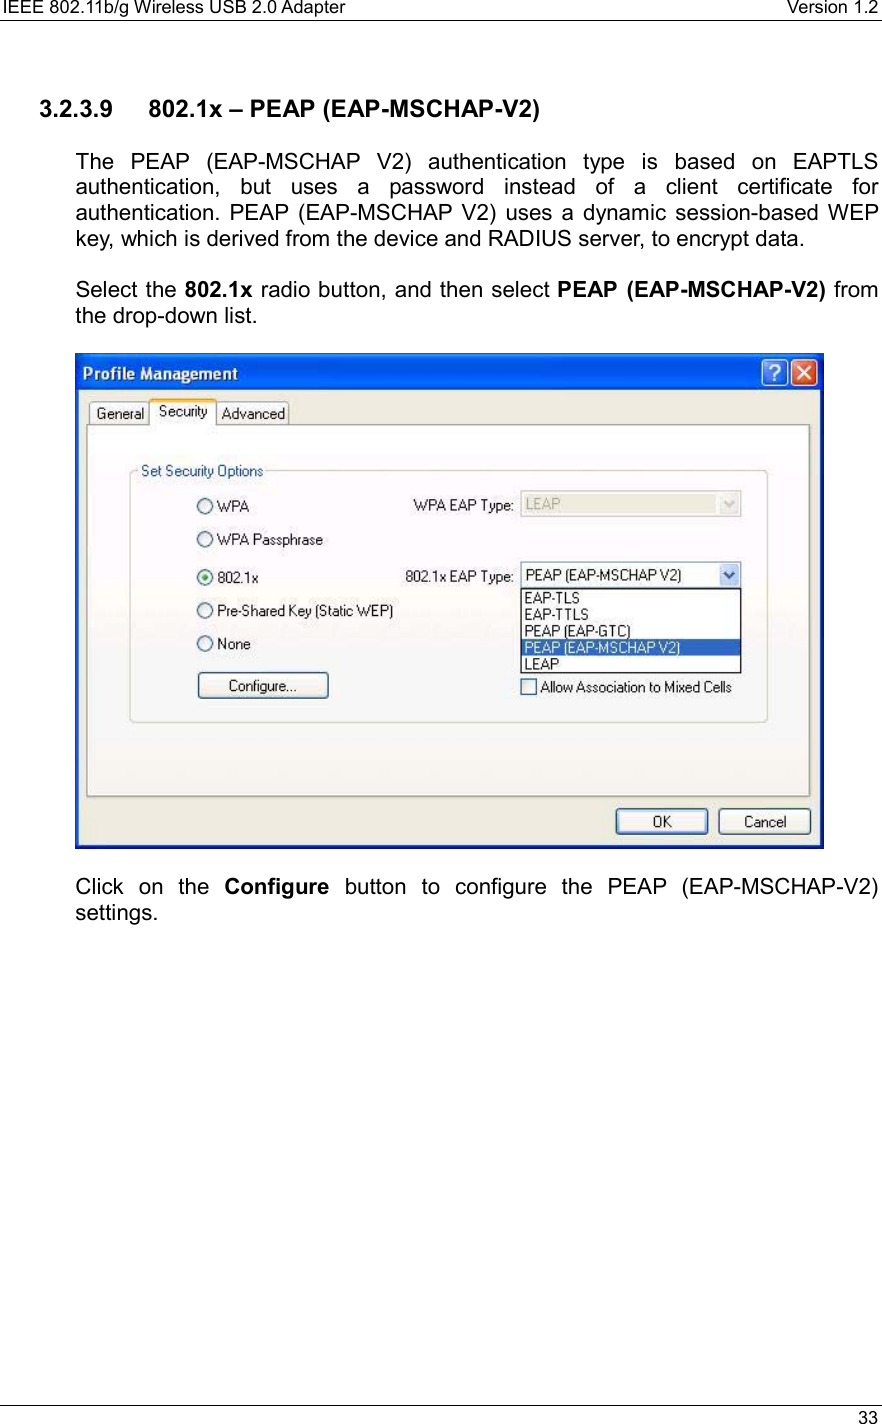 IEEE 802.11b/g Wireless USB 2.0 Adapter    Version 1.2   33   3.2.3.9  802.1x – PEAP (EAP-MSCHAP-V2)  The PEAP (EAP-MSCHAP V2) authentication type is based on EAPTLS authentication, but uses a password instead of a client certificate for authentication. PEAP (EAP-MSCHAP V2) uses a dynamic session-based WEP key, which is derived from the device and RADIUS server, to encrypt data.  Select the 802.1x radio button, and then select PEAP (EAP-MSCHAP-V2) from the drop-down list.     Click on the Configure button to configure the PEAP (EAP-MSCHAP-V2) settings.  